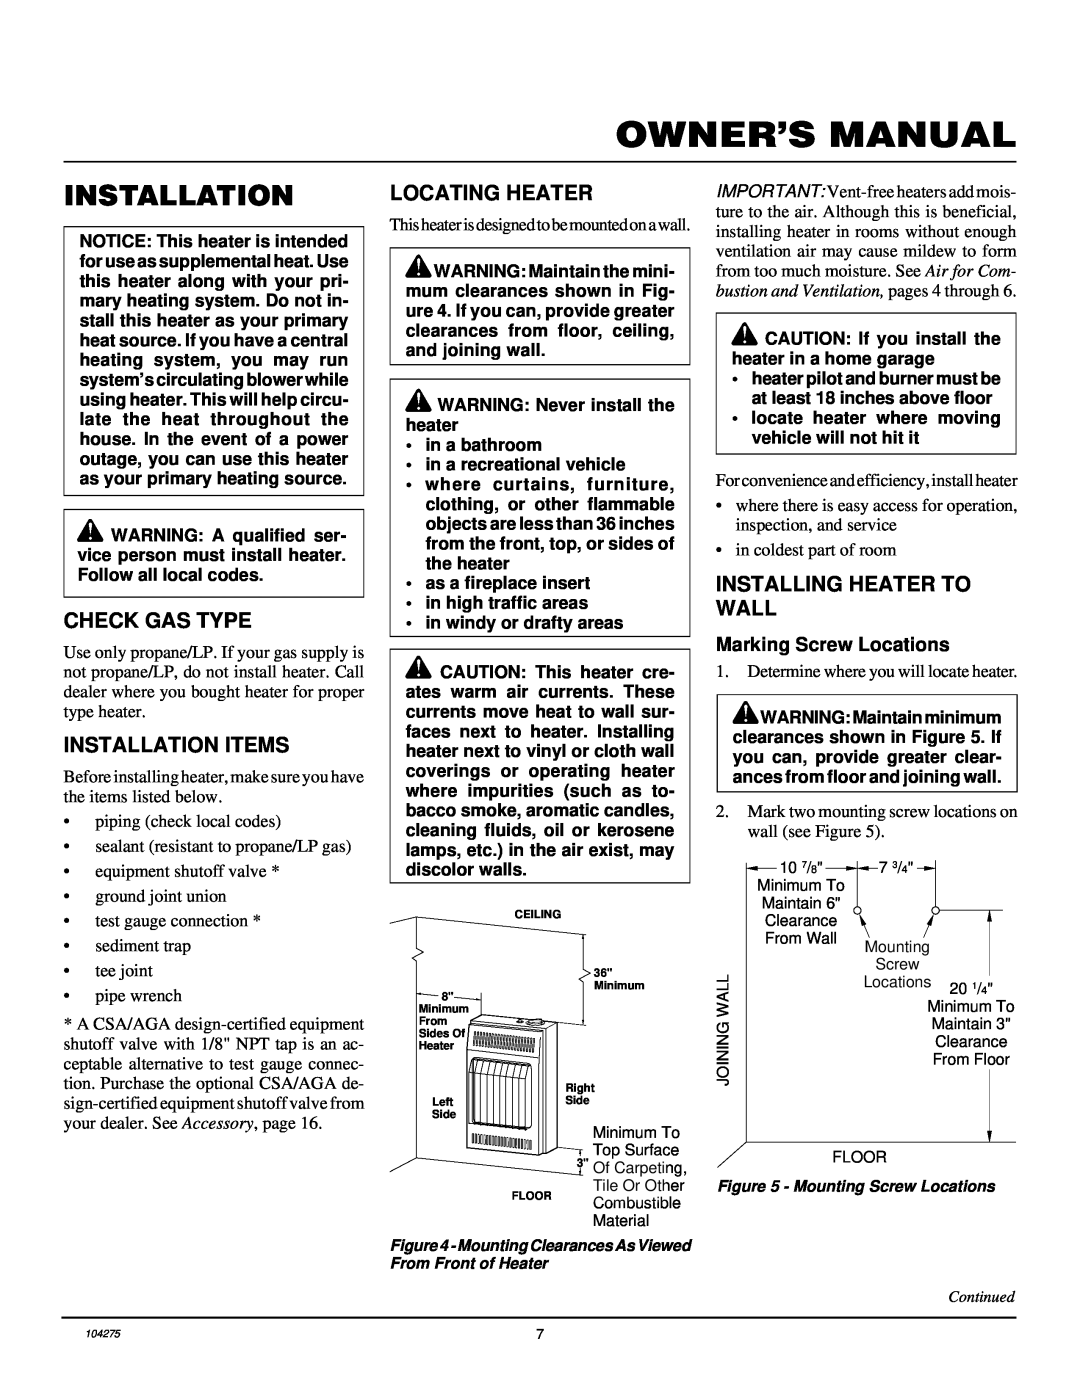 Desa CGP10RLA installation manual Check Gas Type, Installation Items, Locating Heater, Installing Heater To Wall 